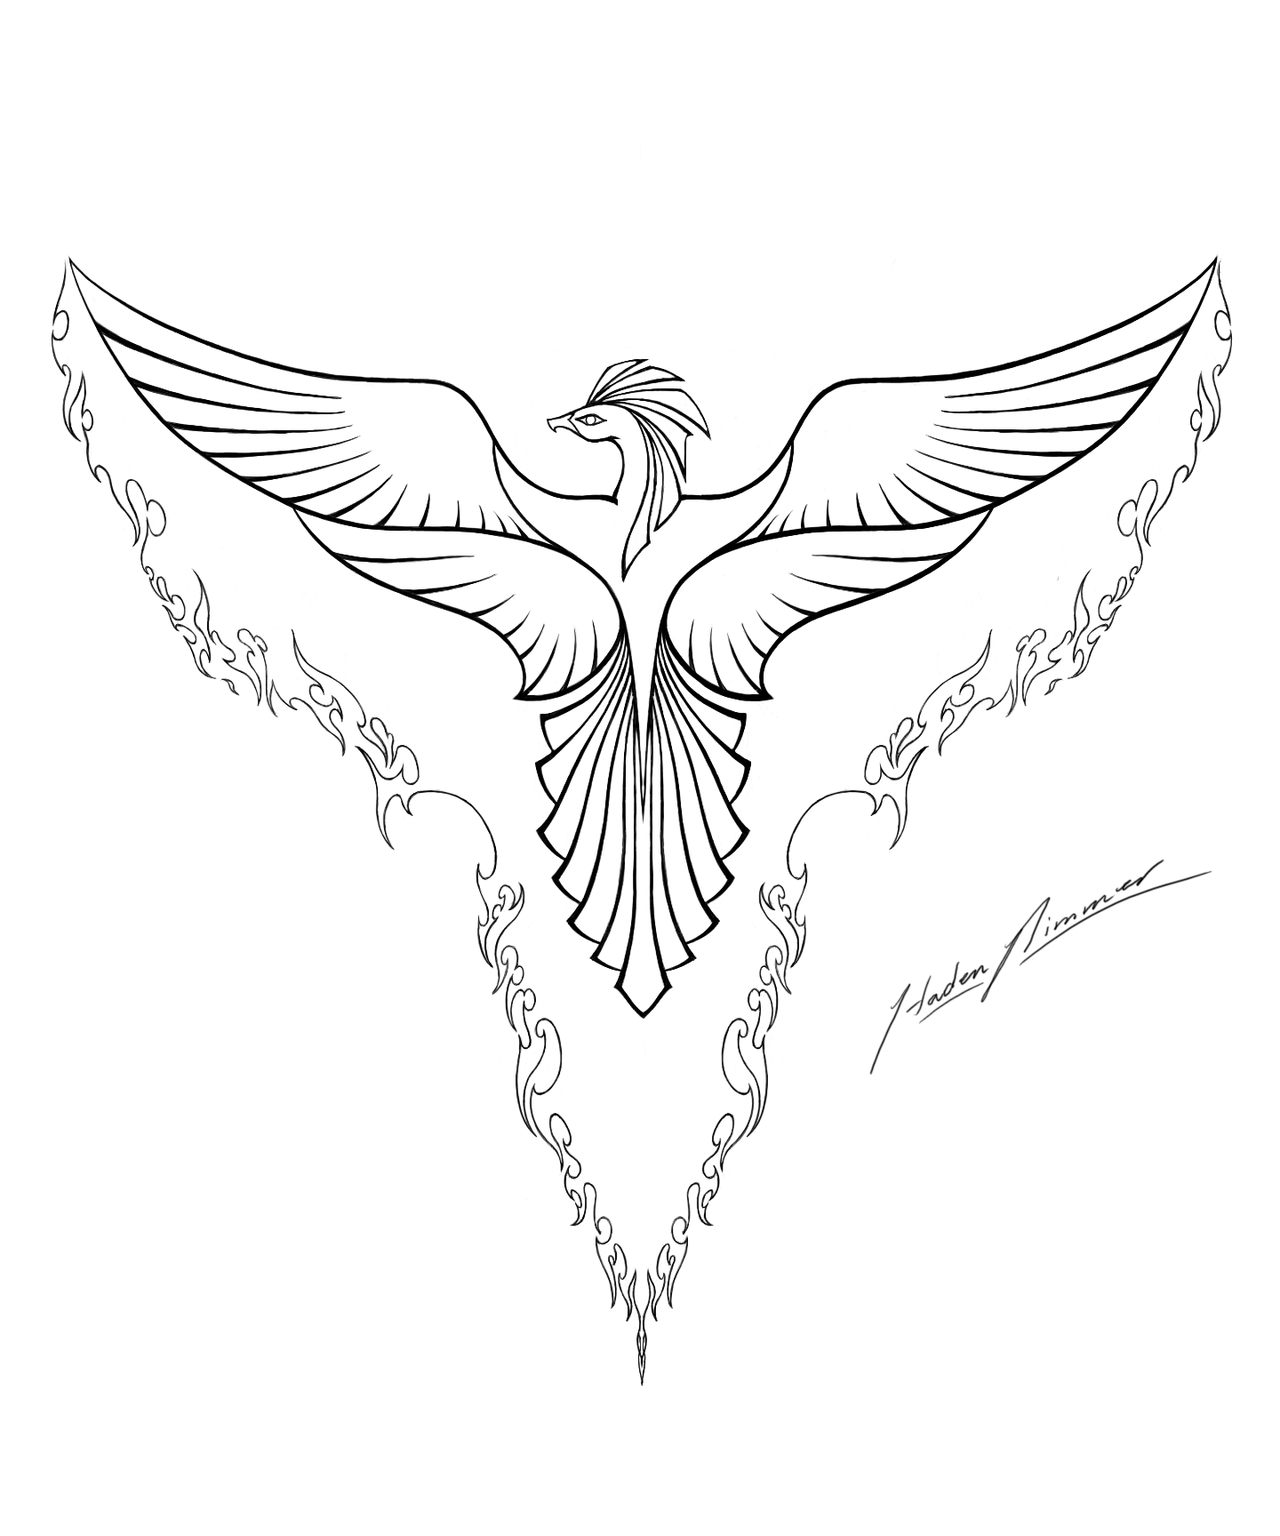 Phoenix coloring pages to download and print for free